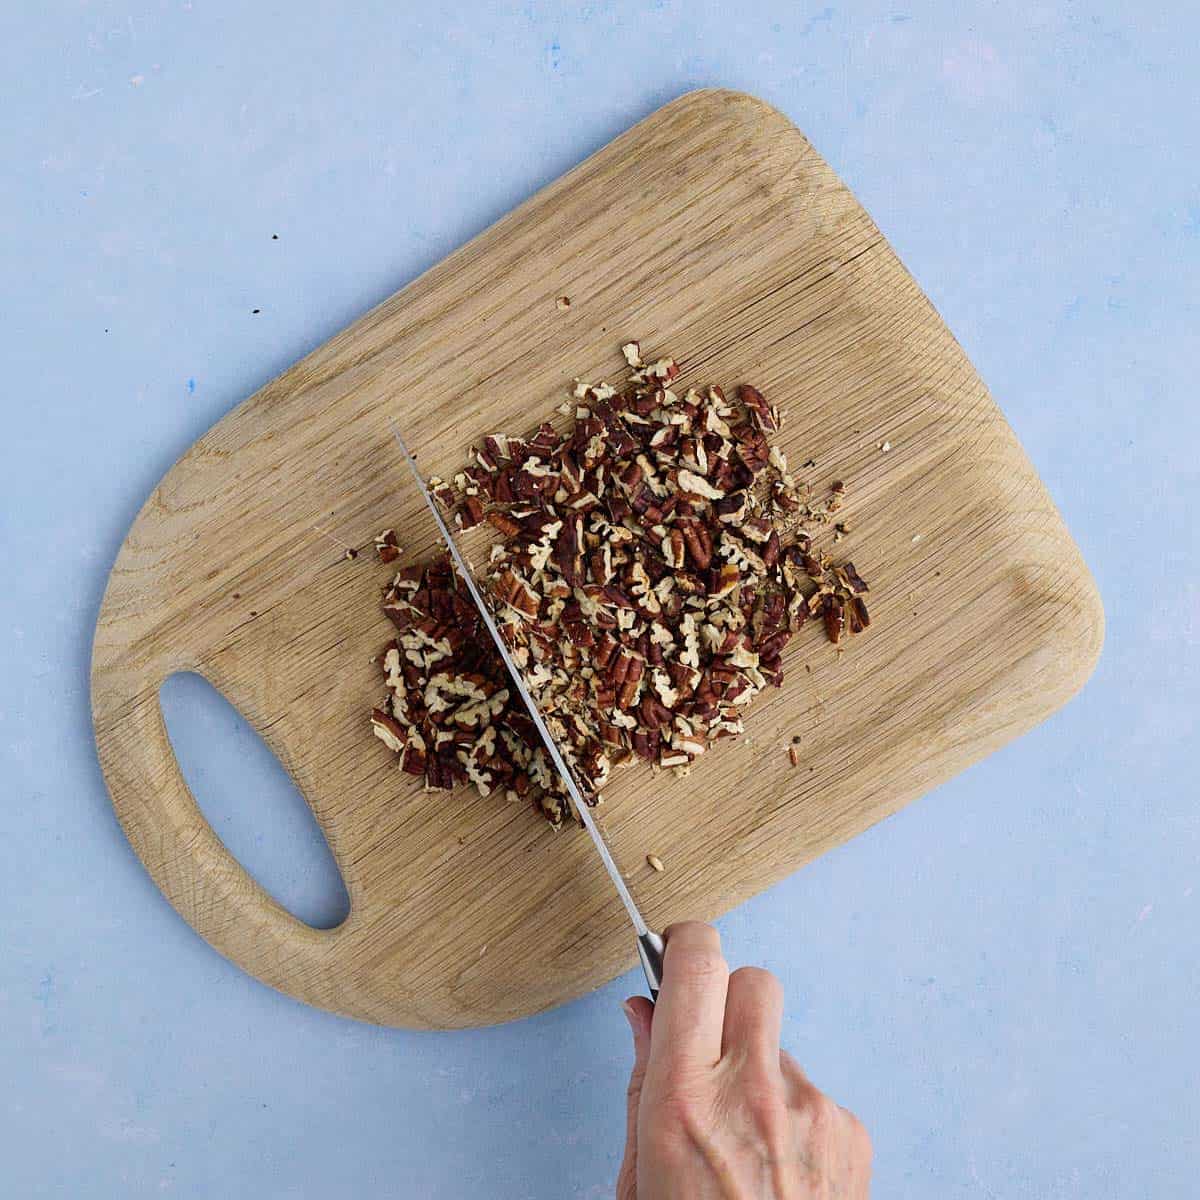 Chopping toasted pecans with a knife on a cutting board.